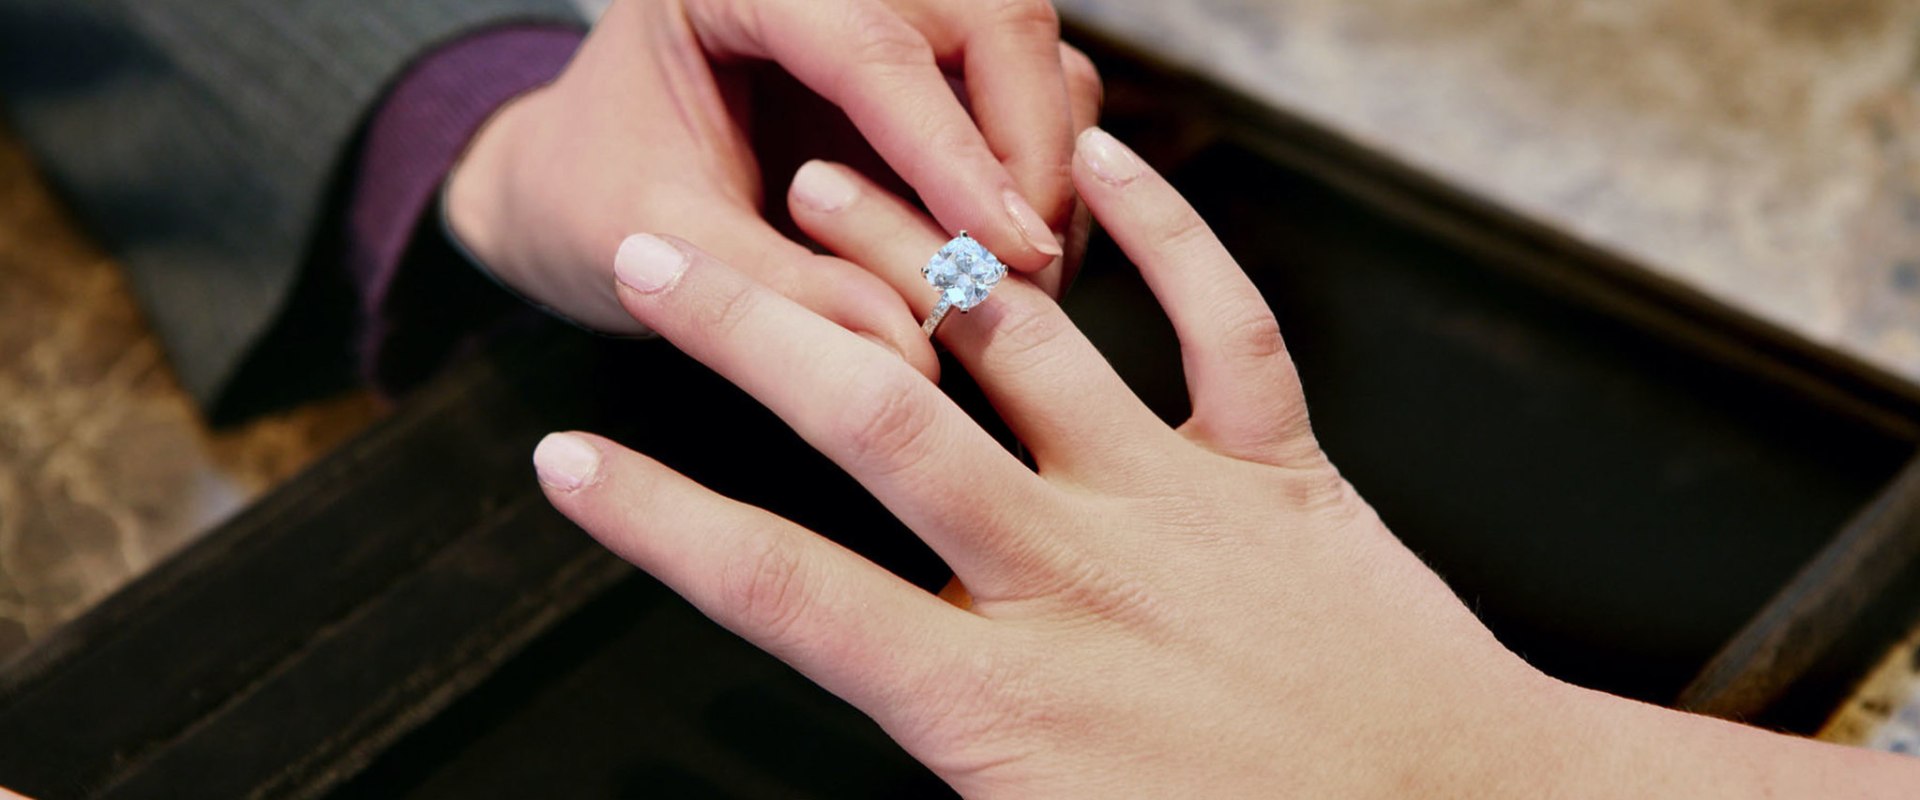 The Symbolism of Engagement Rings: What You Need to Know